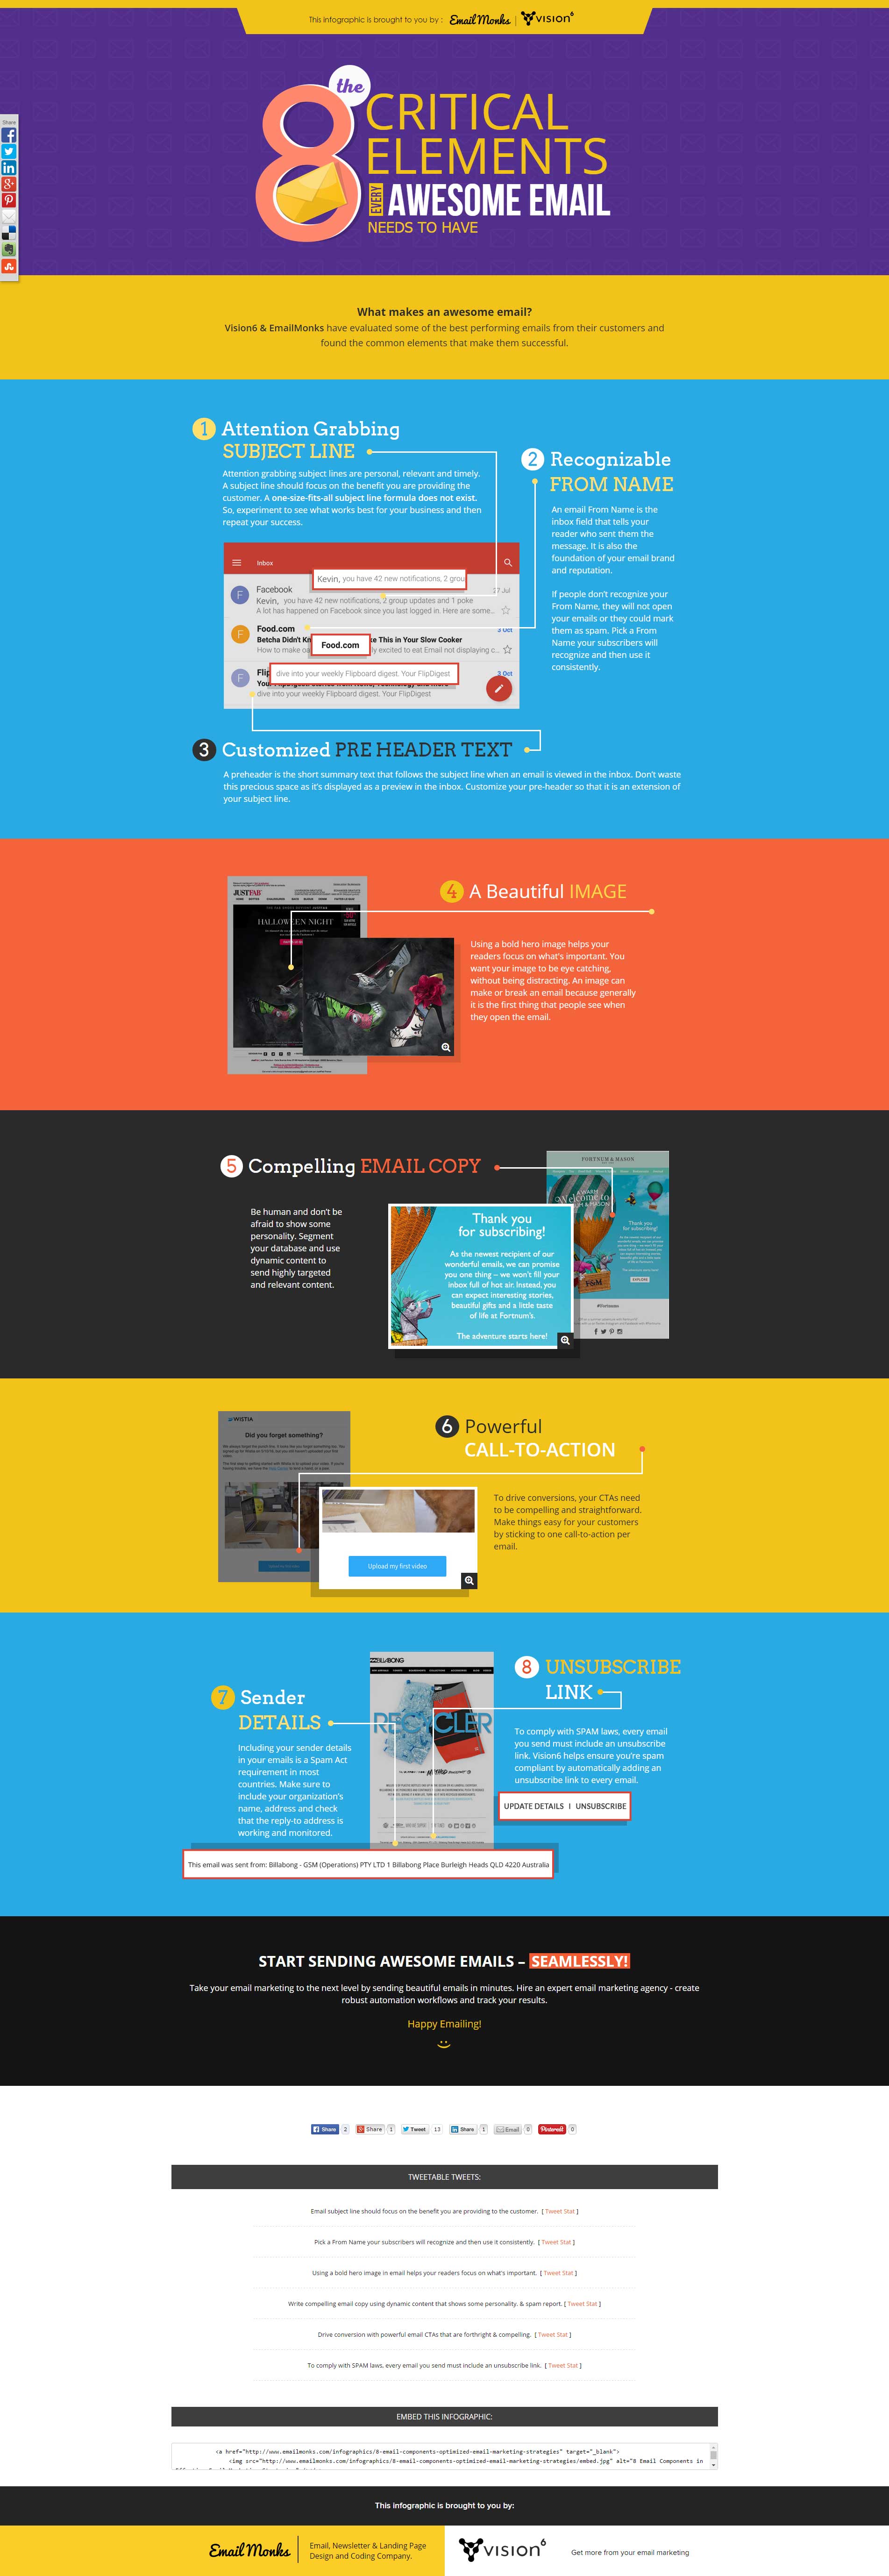 8 critical elements of an awesome email [Infographic]